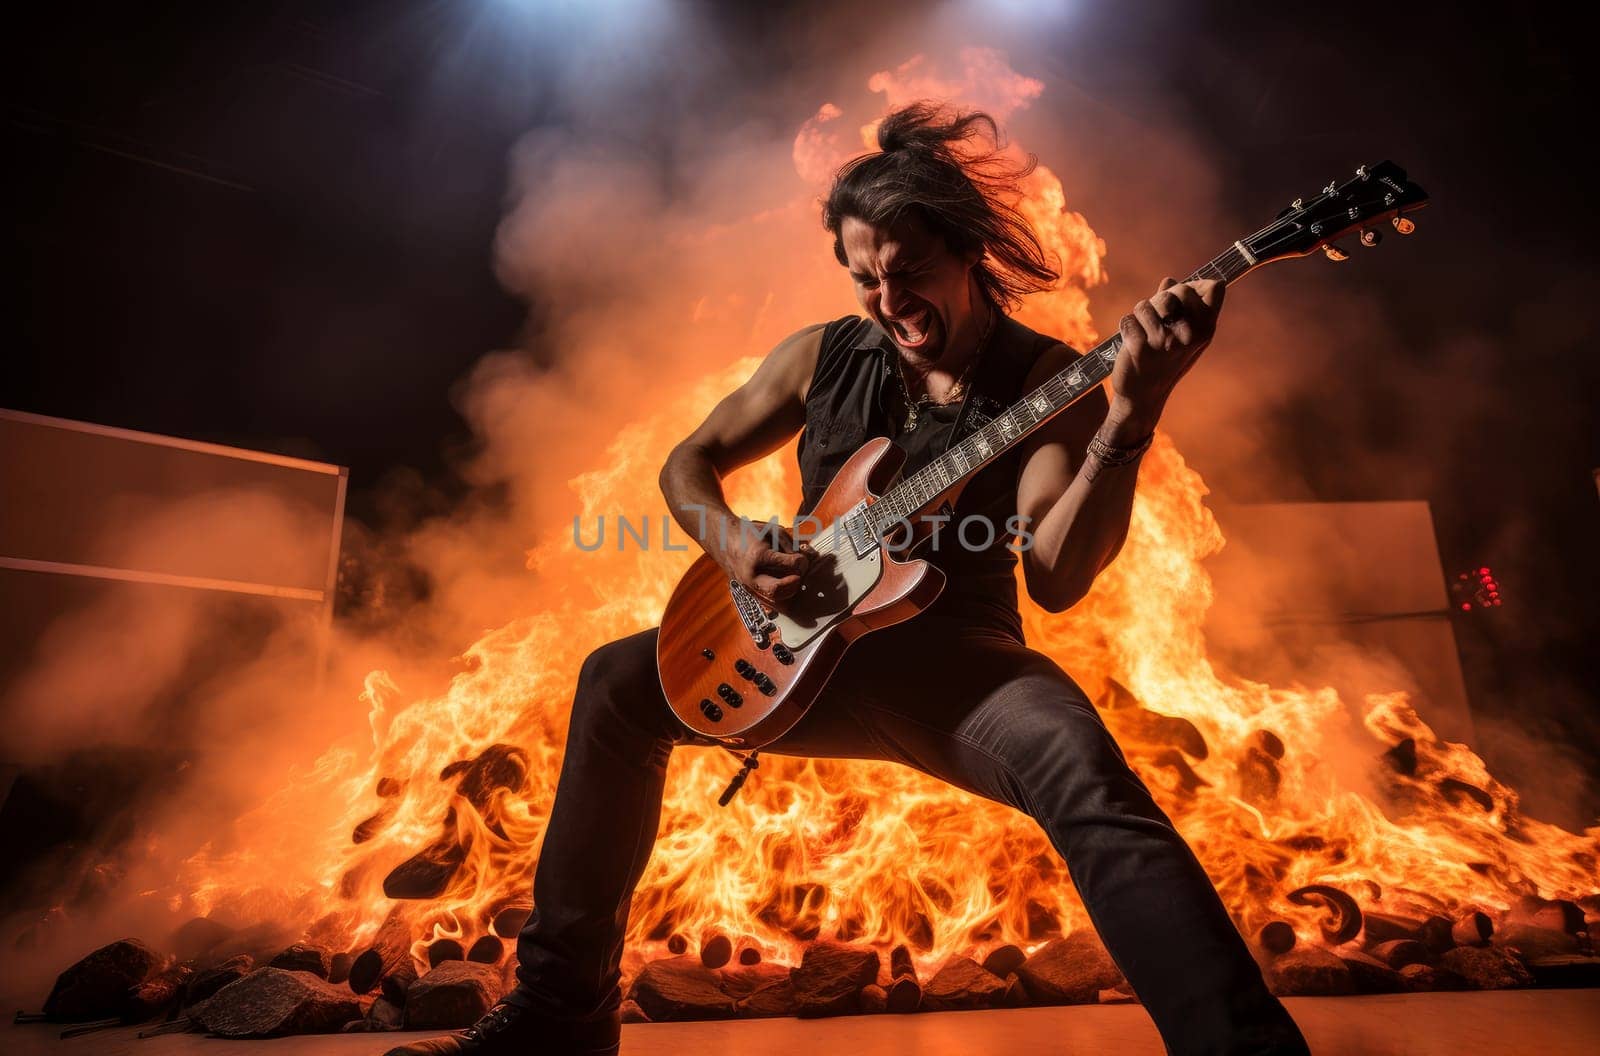 Fiery Guitarist take on fire. Rock stage music by ylivdesign